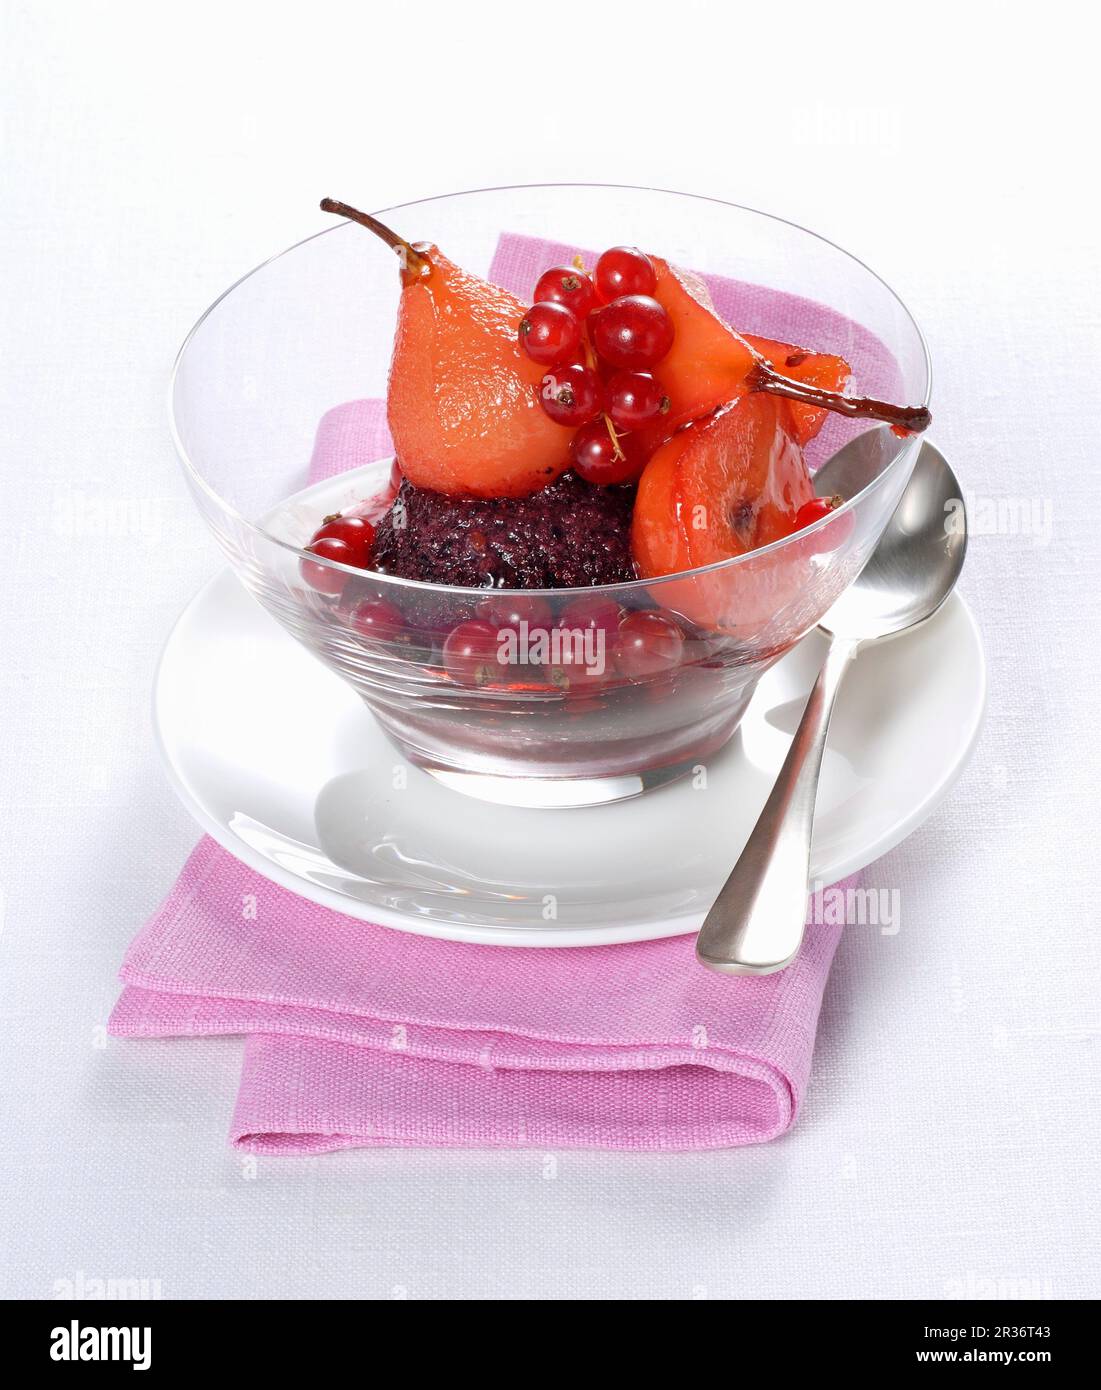 Berry ice cream with pear & redcurrant salad Stock Photo